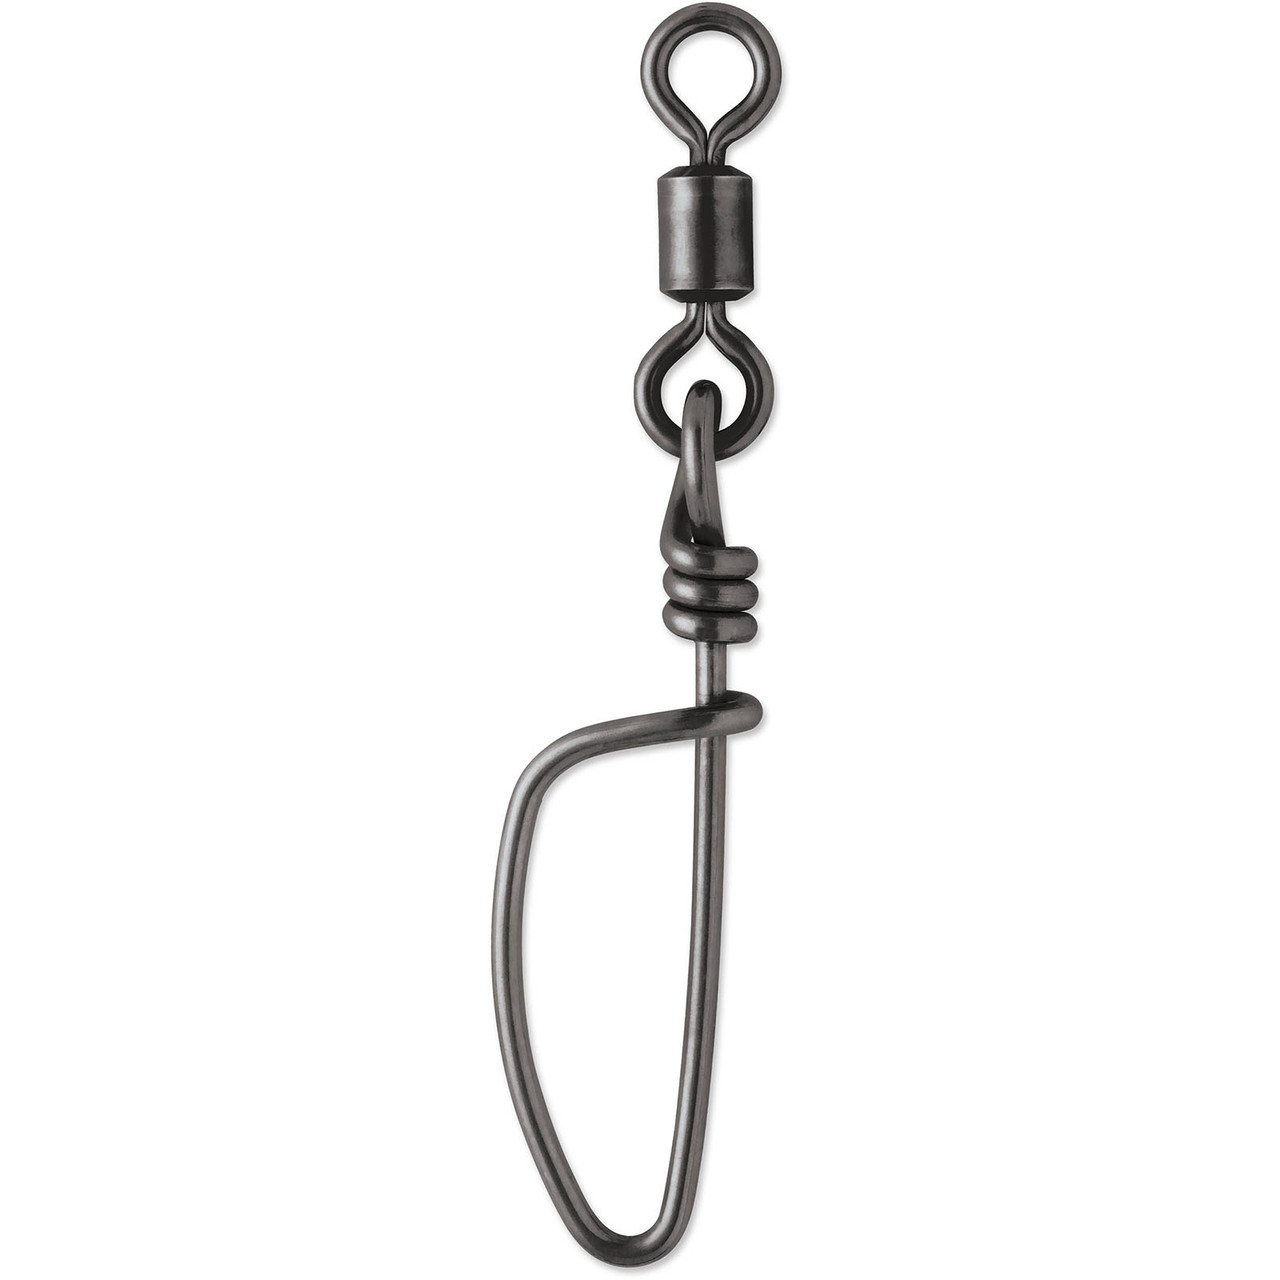  Stainless Steel Swivel Snap Hook - 2 3/4 or Medium Size :  Sailing Hardware : Sports & Outdoors